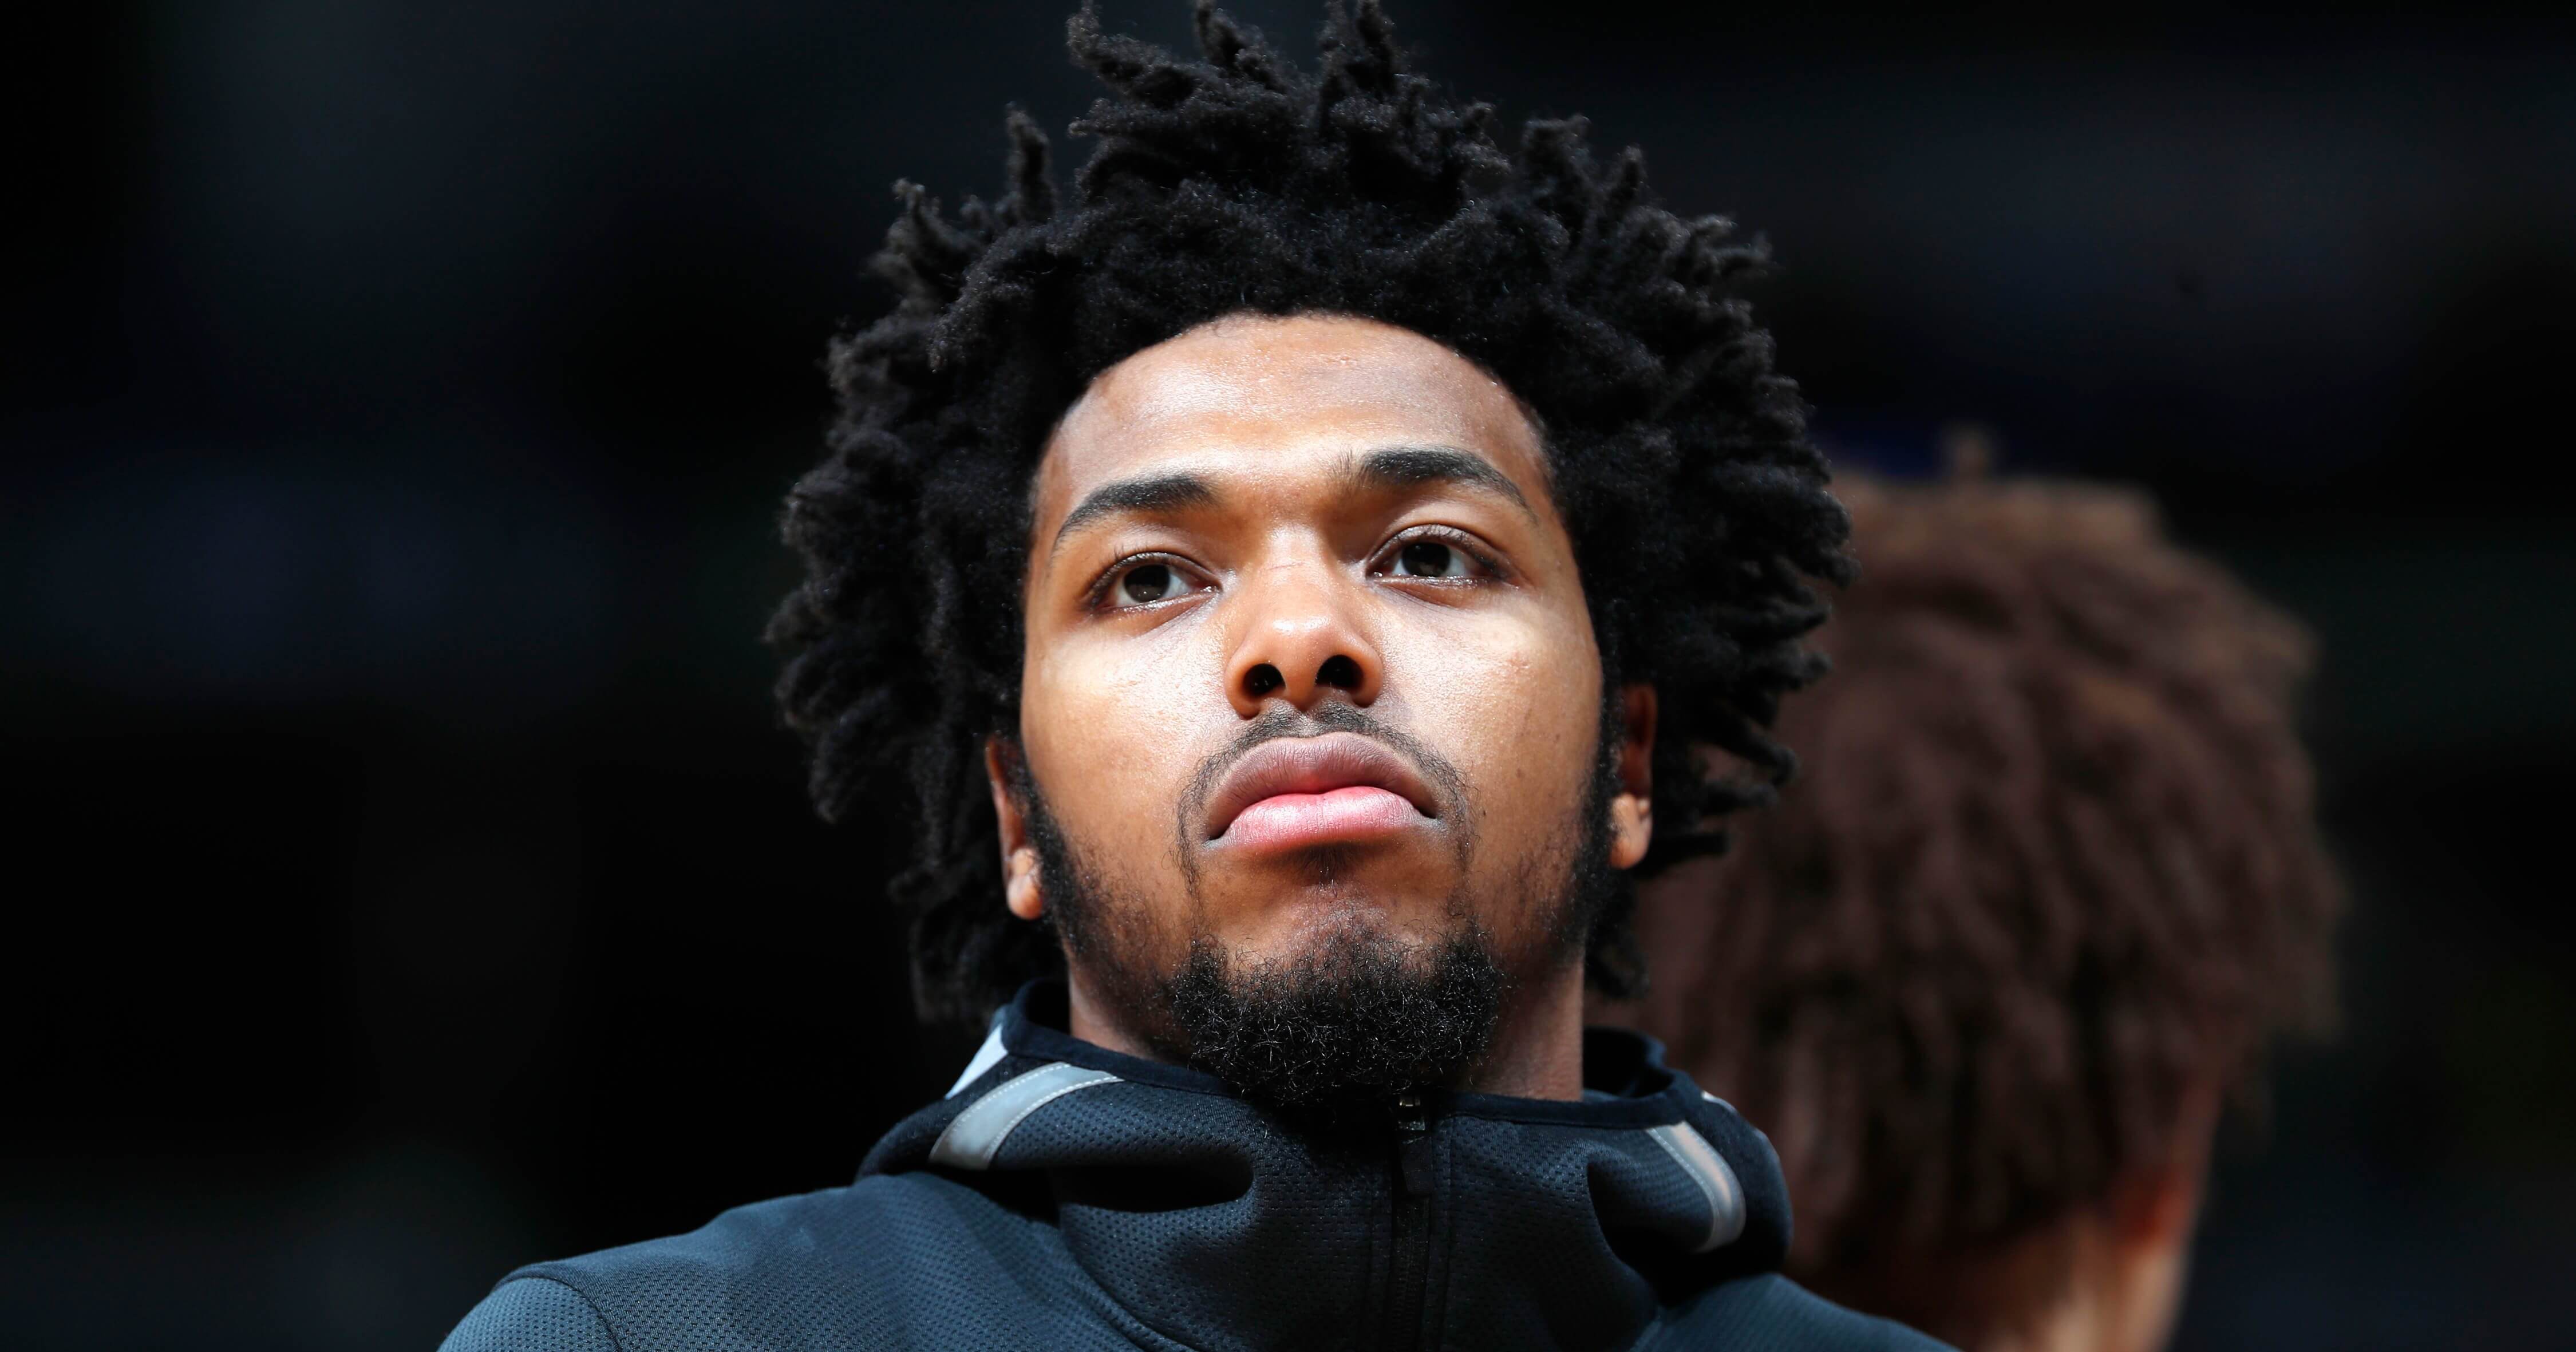 Milwaukee Bucks guard Sterling Brown is seen April 1 during an NBA basketball game in Denver.